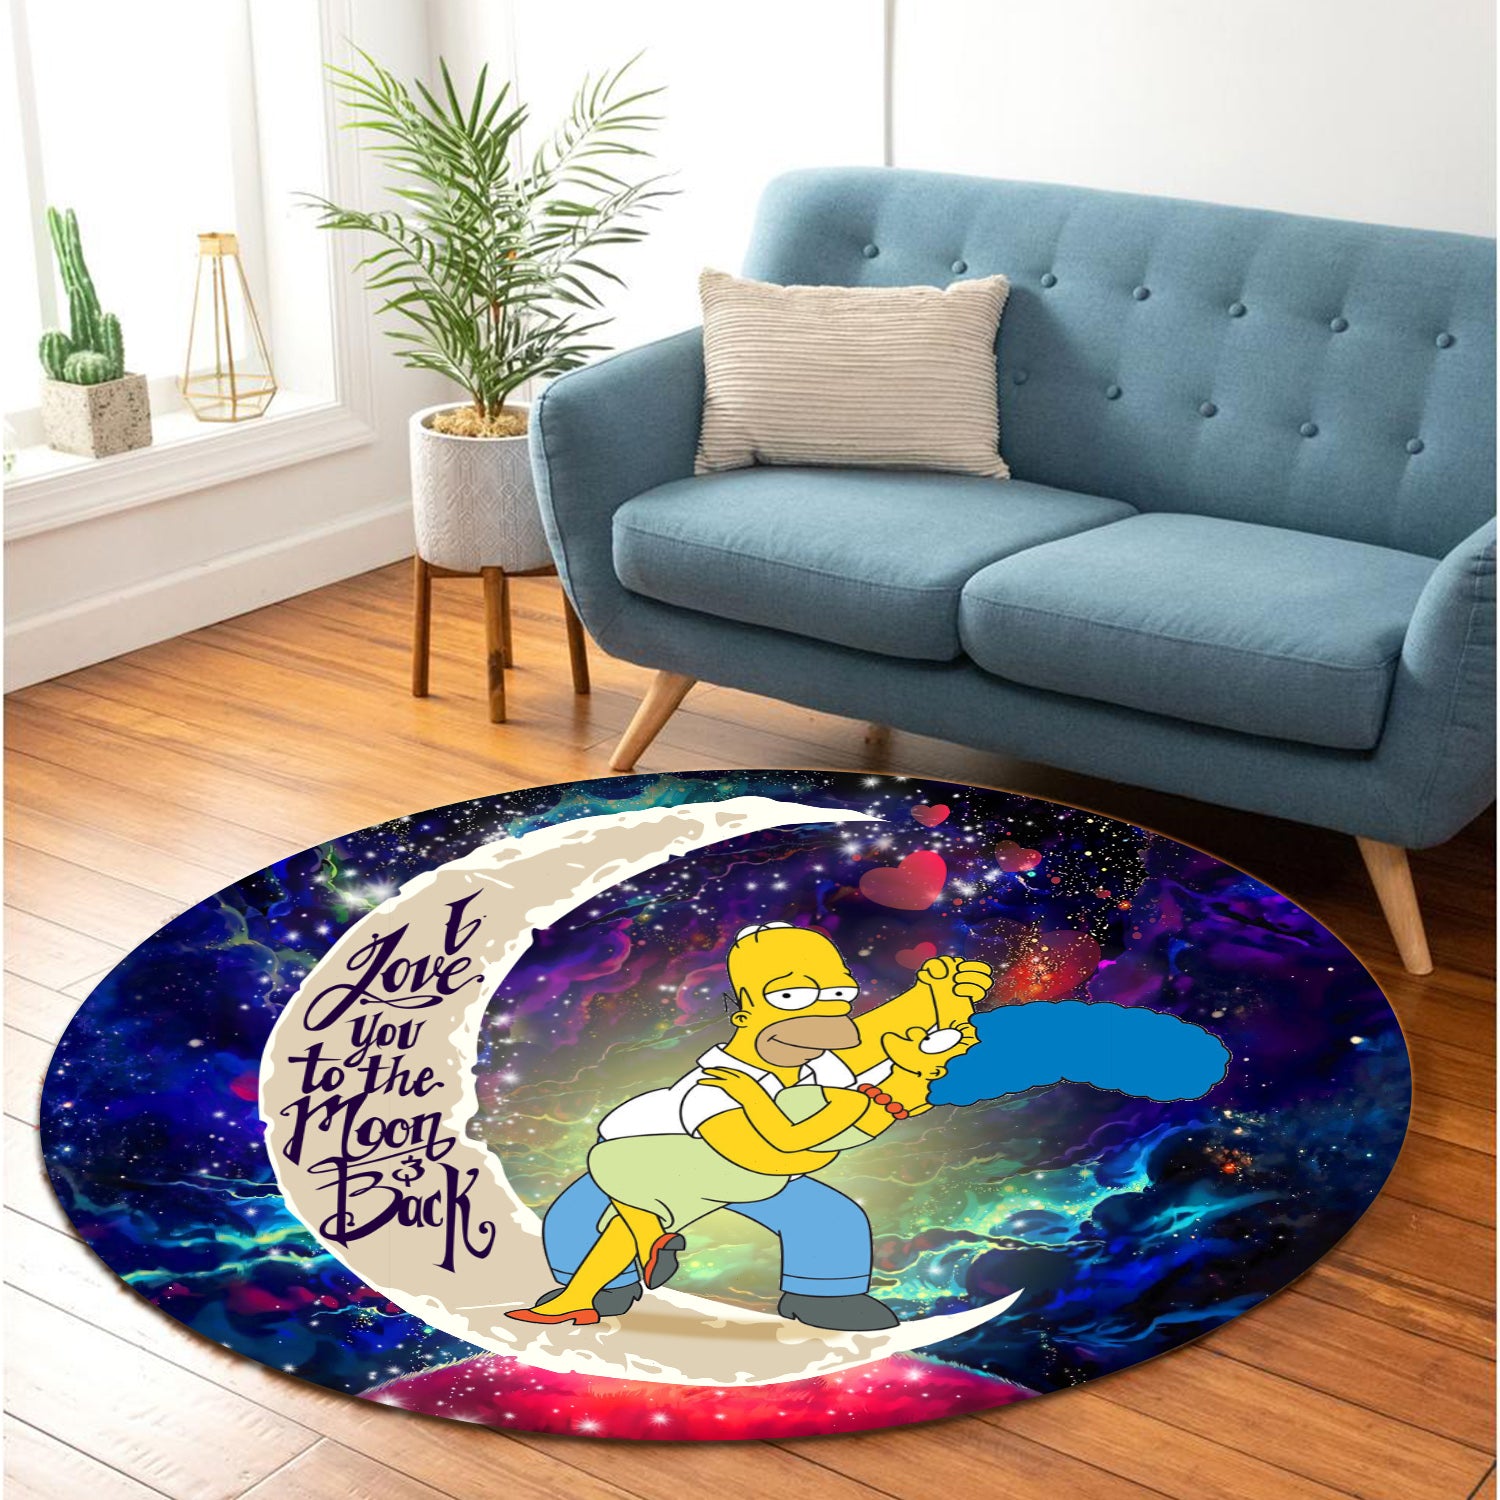 Simpsons Family Love You To The Moon Galaxy Round Carpet Rug Bedroom Livingroom Home Decor Nearkii